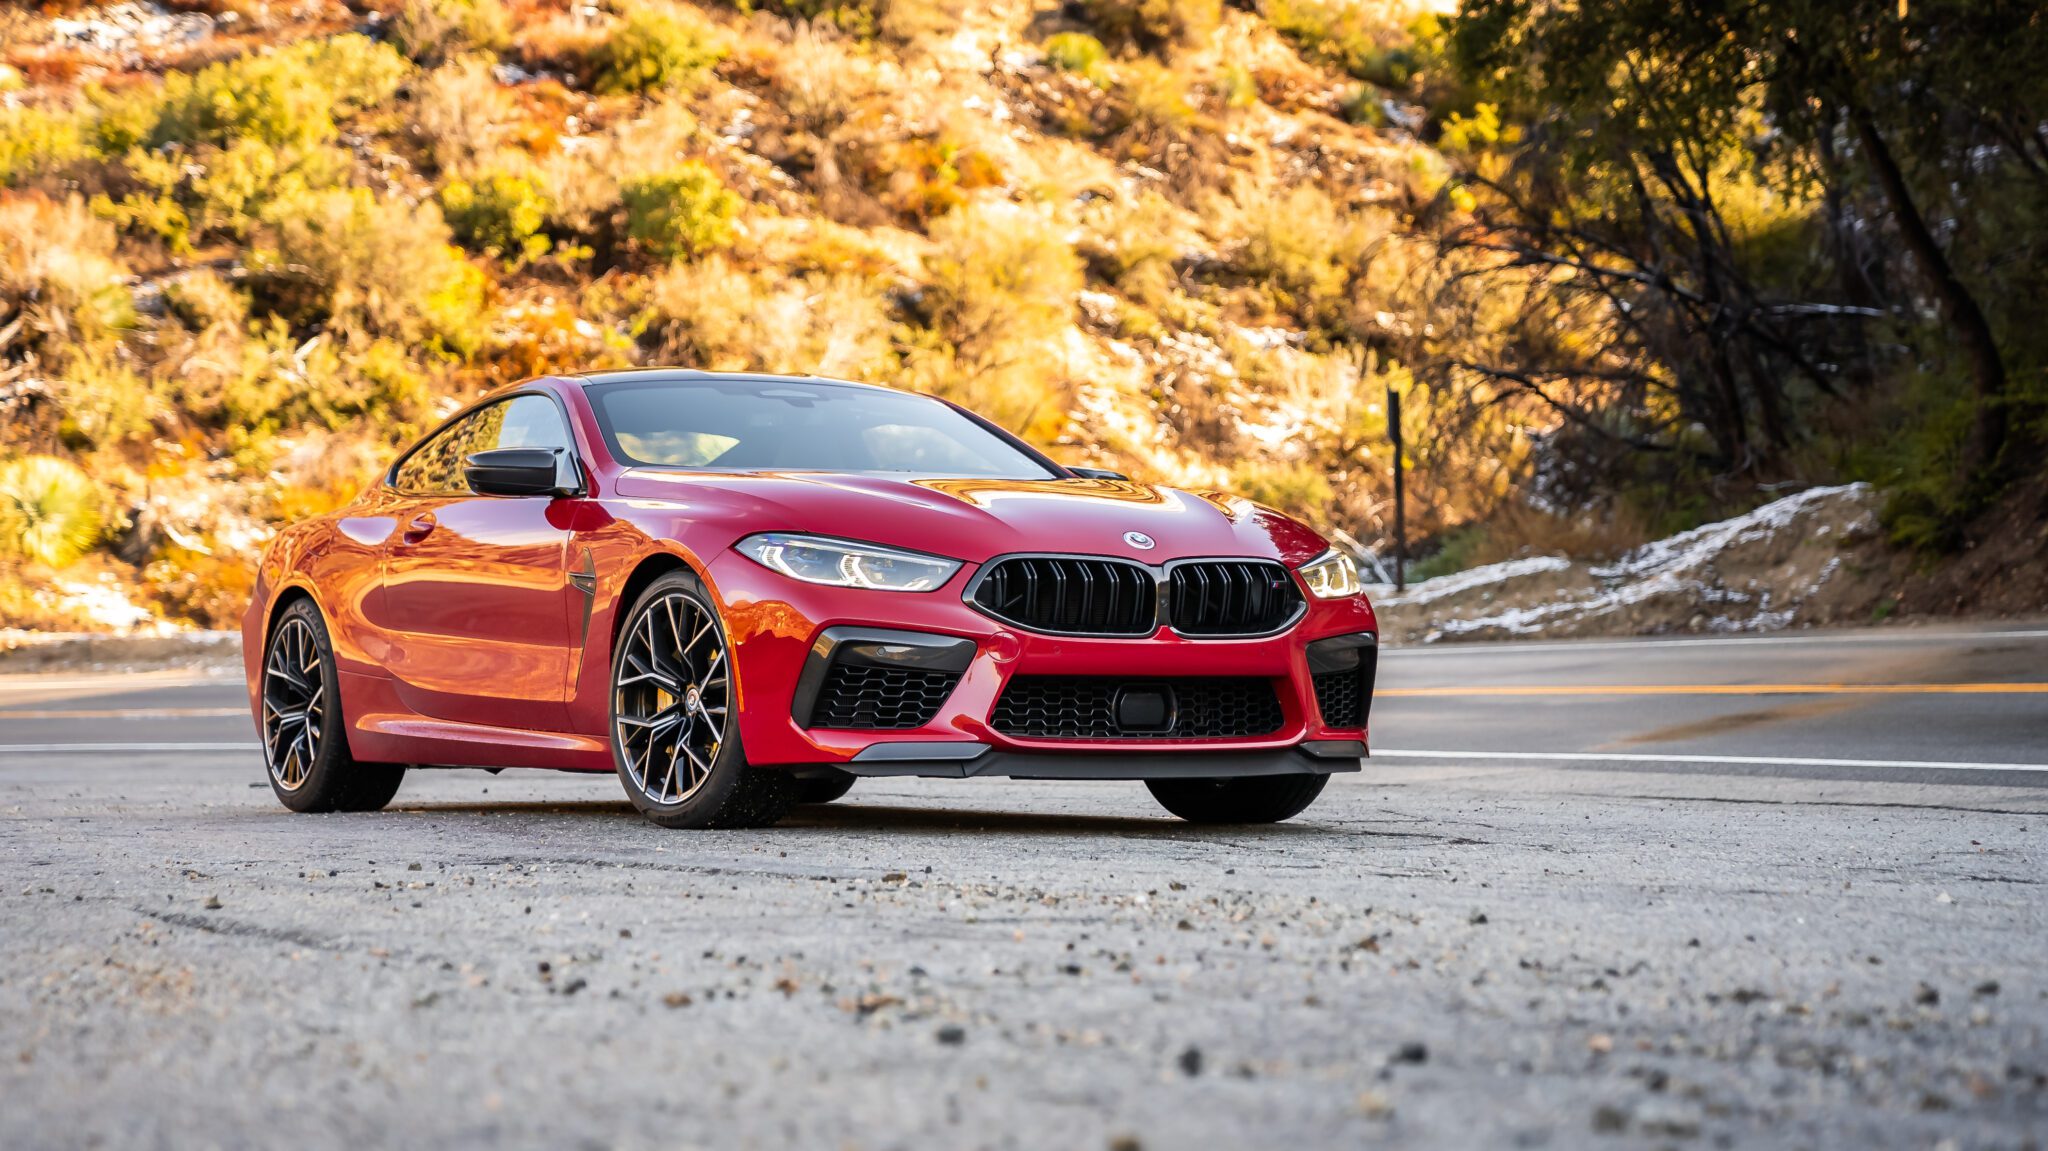 An image of an Imola Red BMW M8 Competition parked outdoors.